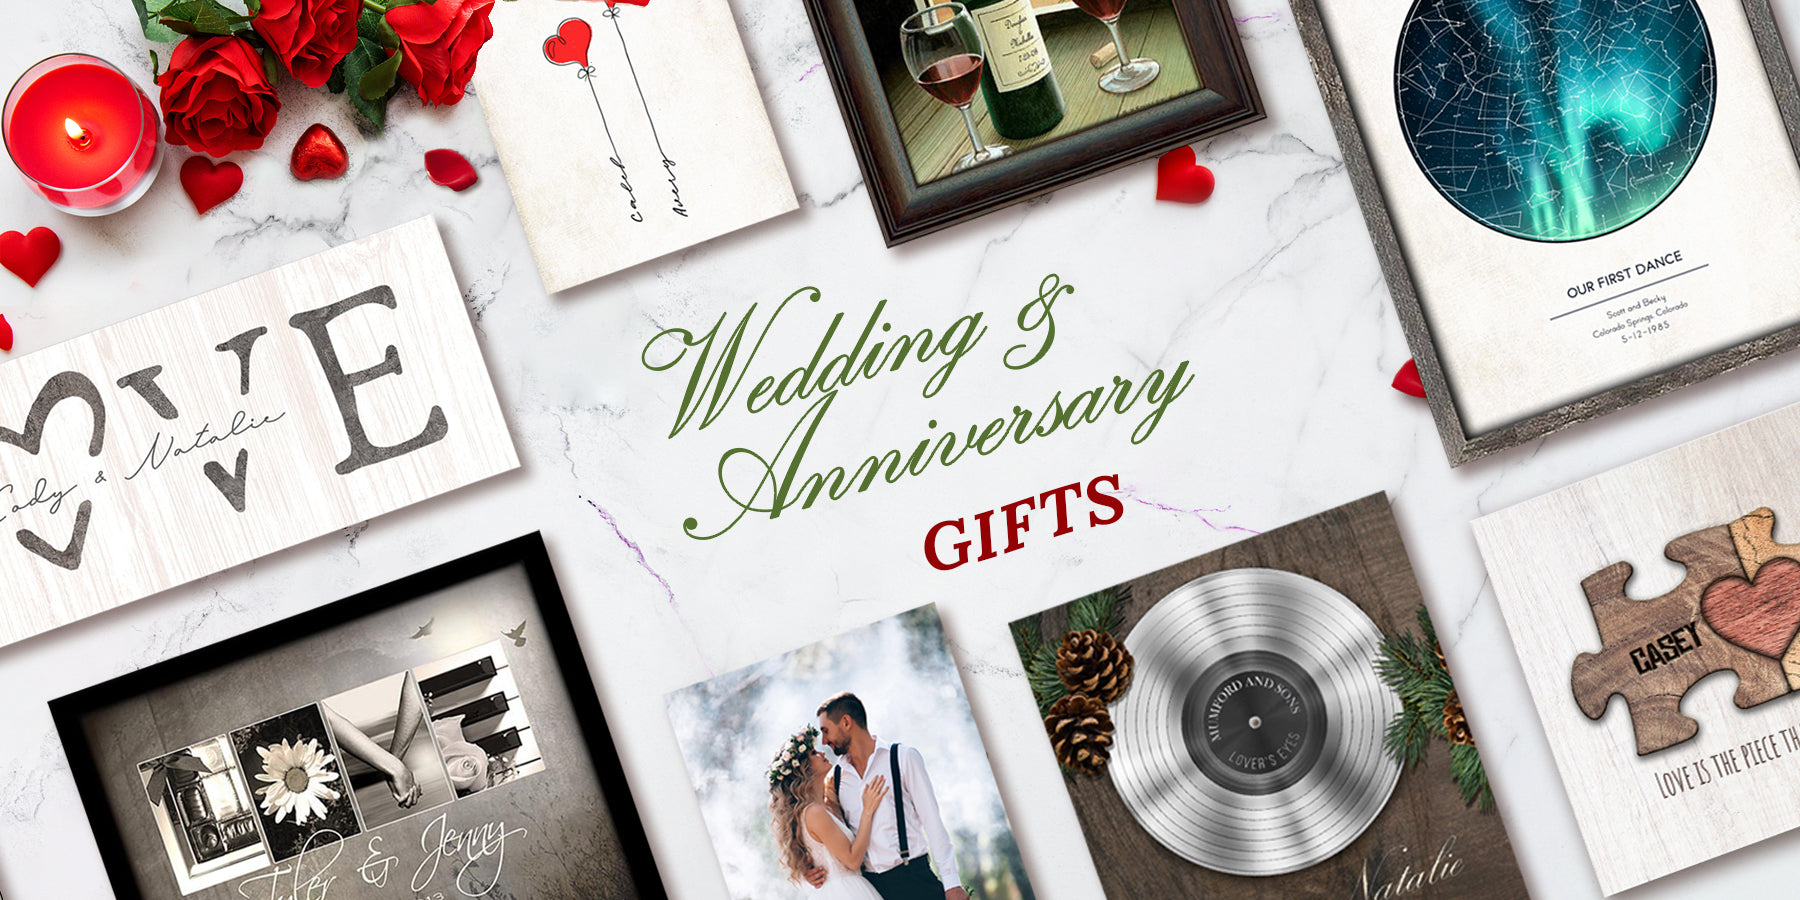 Romantic Gifts for Weddings & Anniversaries